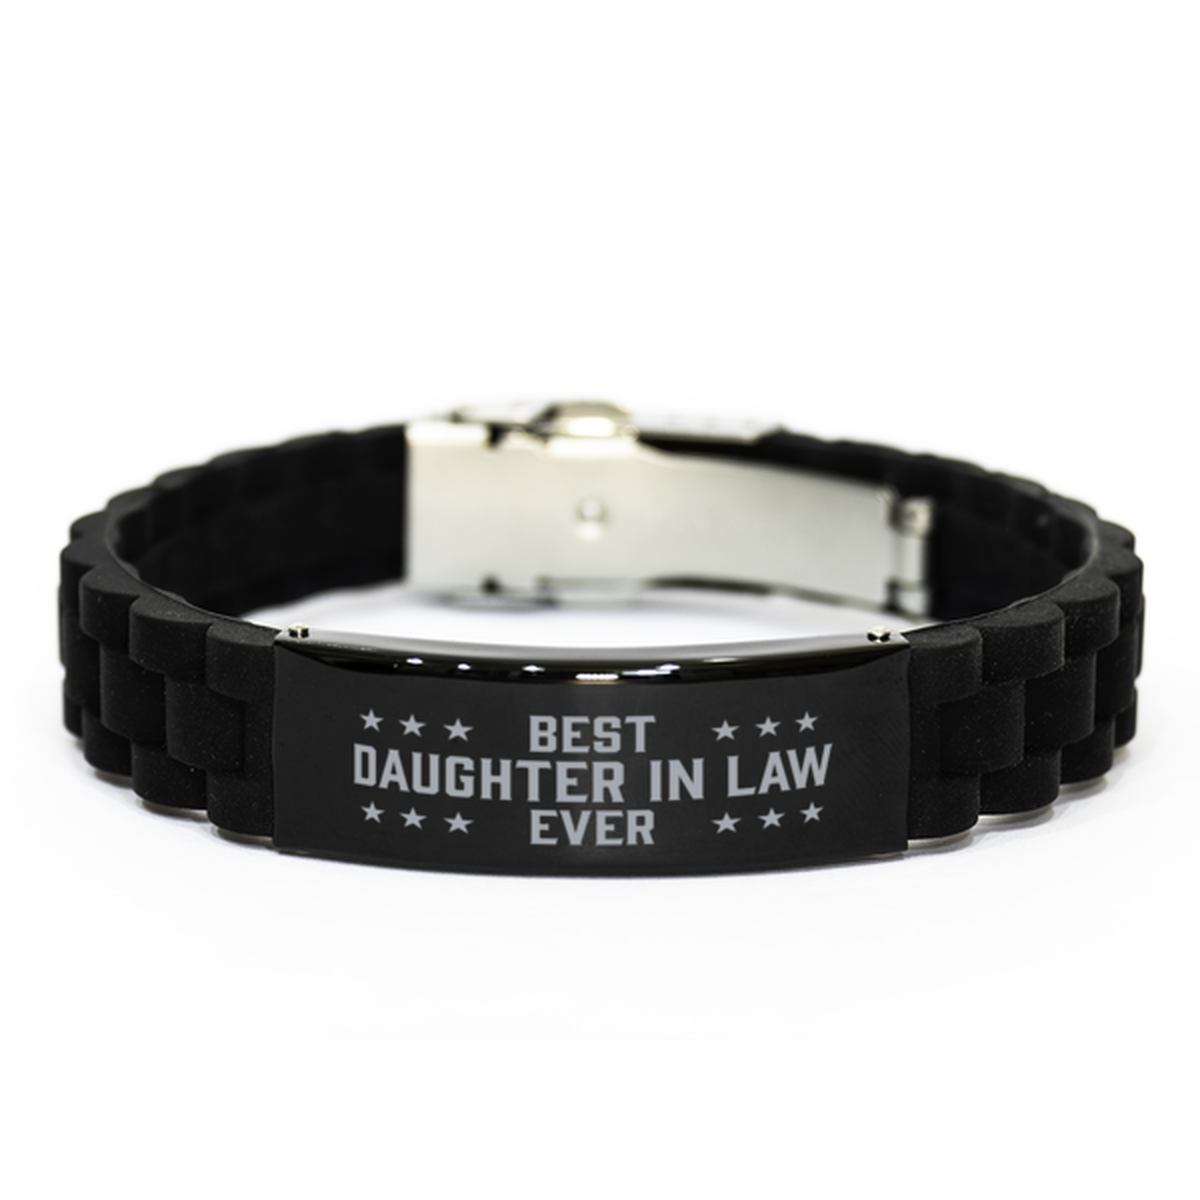 Best Daughter in law Ever Daughter in law Gifts, Funny Black Engraved Bracelet For Daughter in law, Family Gifts For Women